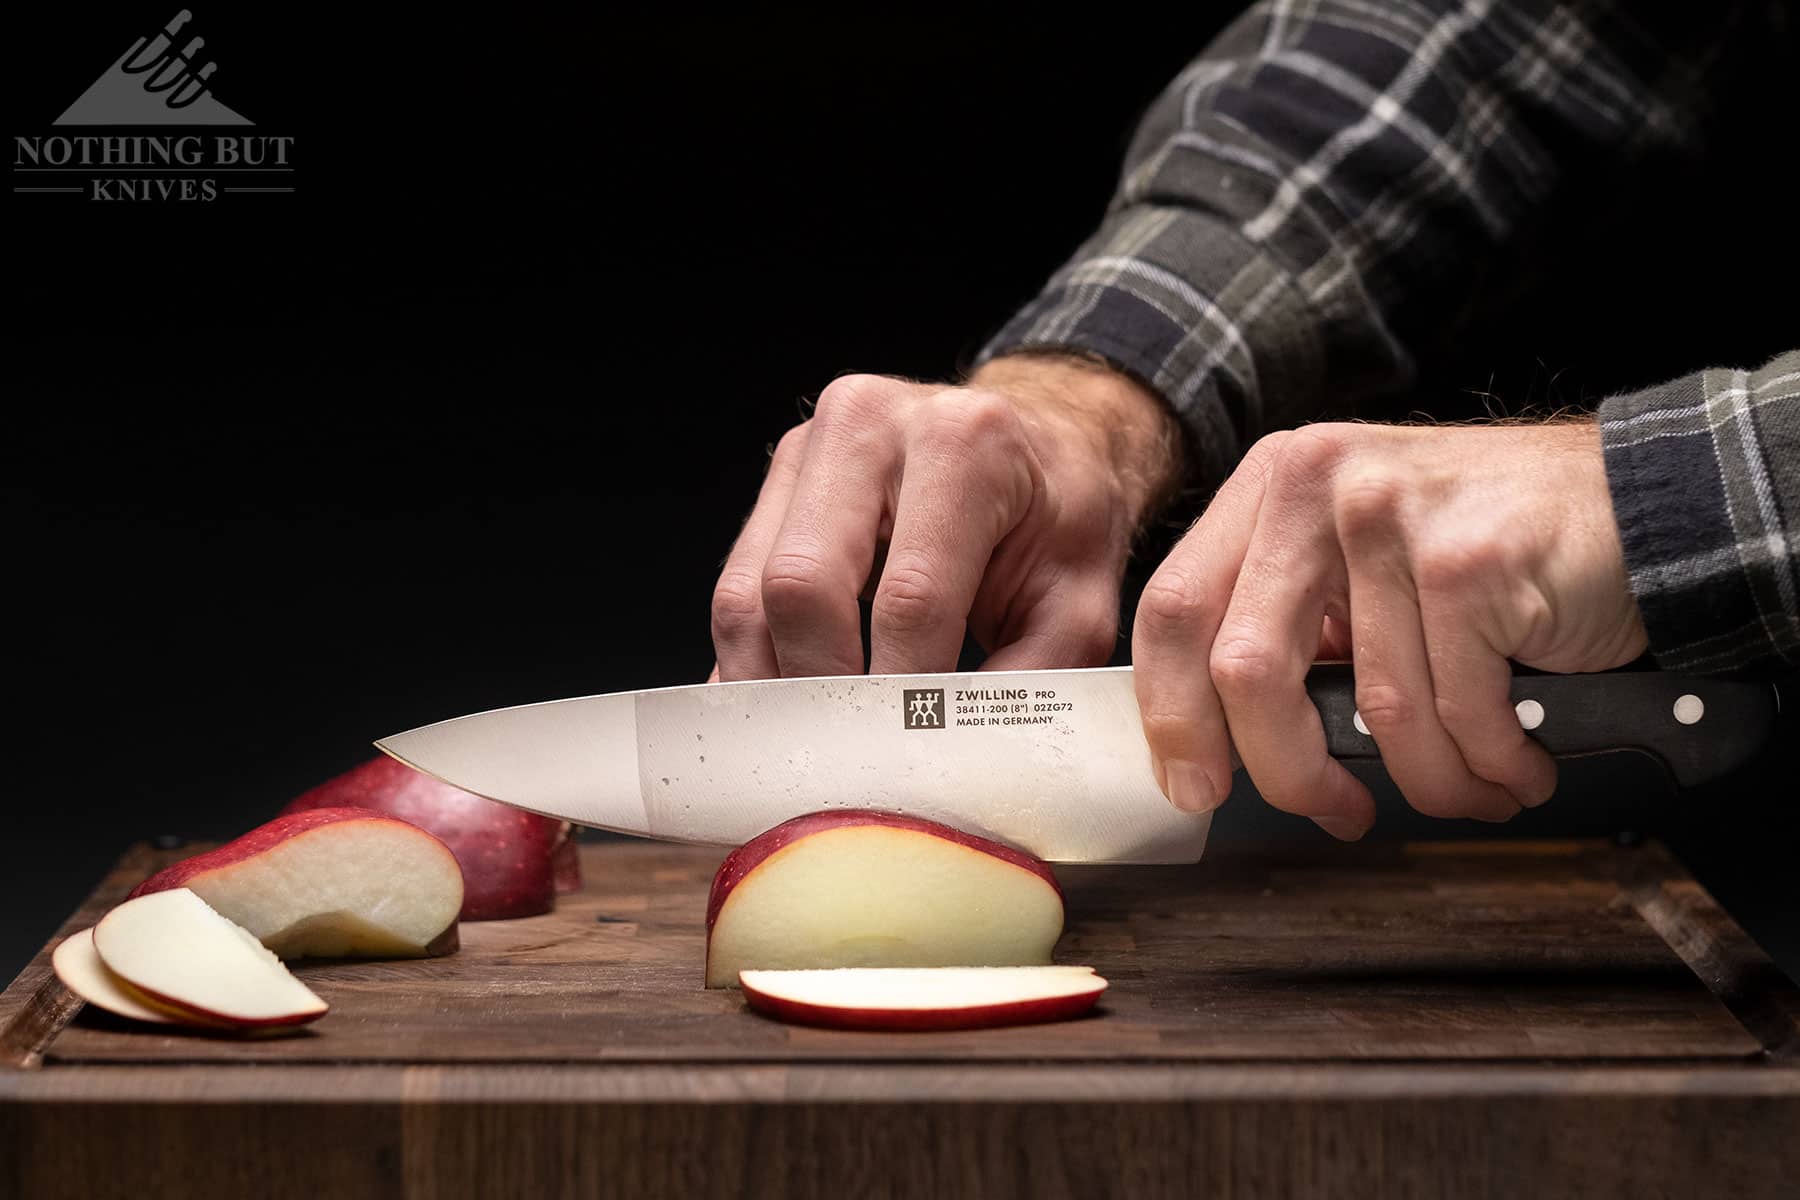 Slicing an apple with the Zwilling Pro chef knife to show its scale and cutting ability. 